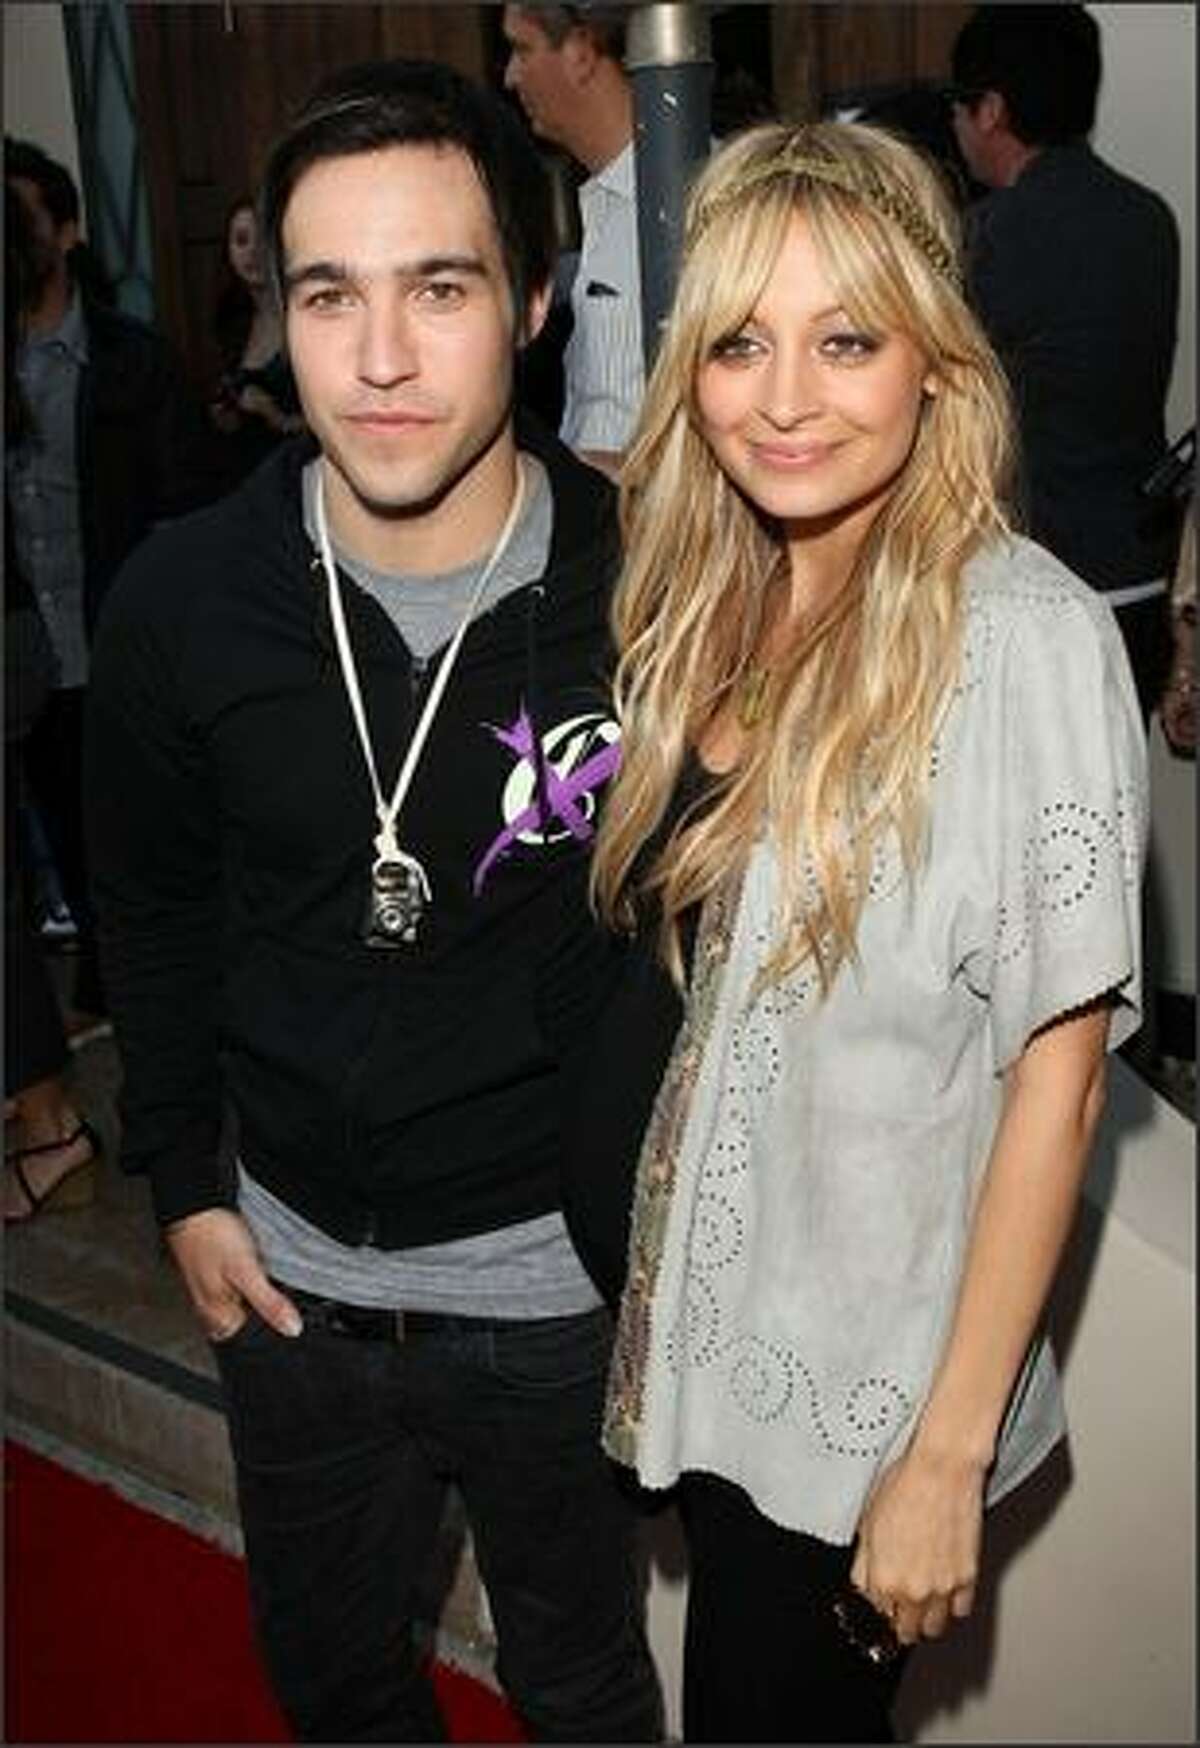 Musician/designer Pete Wentz and designer Nicole Richie co-host the House of Harlow, Clandestine Industries and Switch Boutique fashion show held at Boulevard3 in Hollywood, Calif., on Thursday, June 4, 2009. House of Harlow is Richie's jewelry line, Clandestine Industries is Wentz's clothing line and Switch Boutique is a Beverly Hills fashion store.